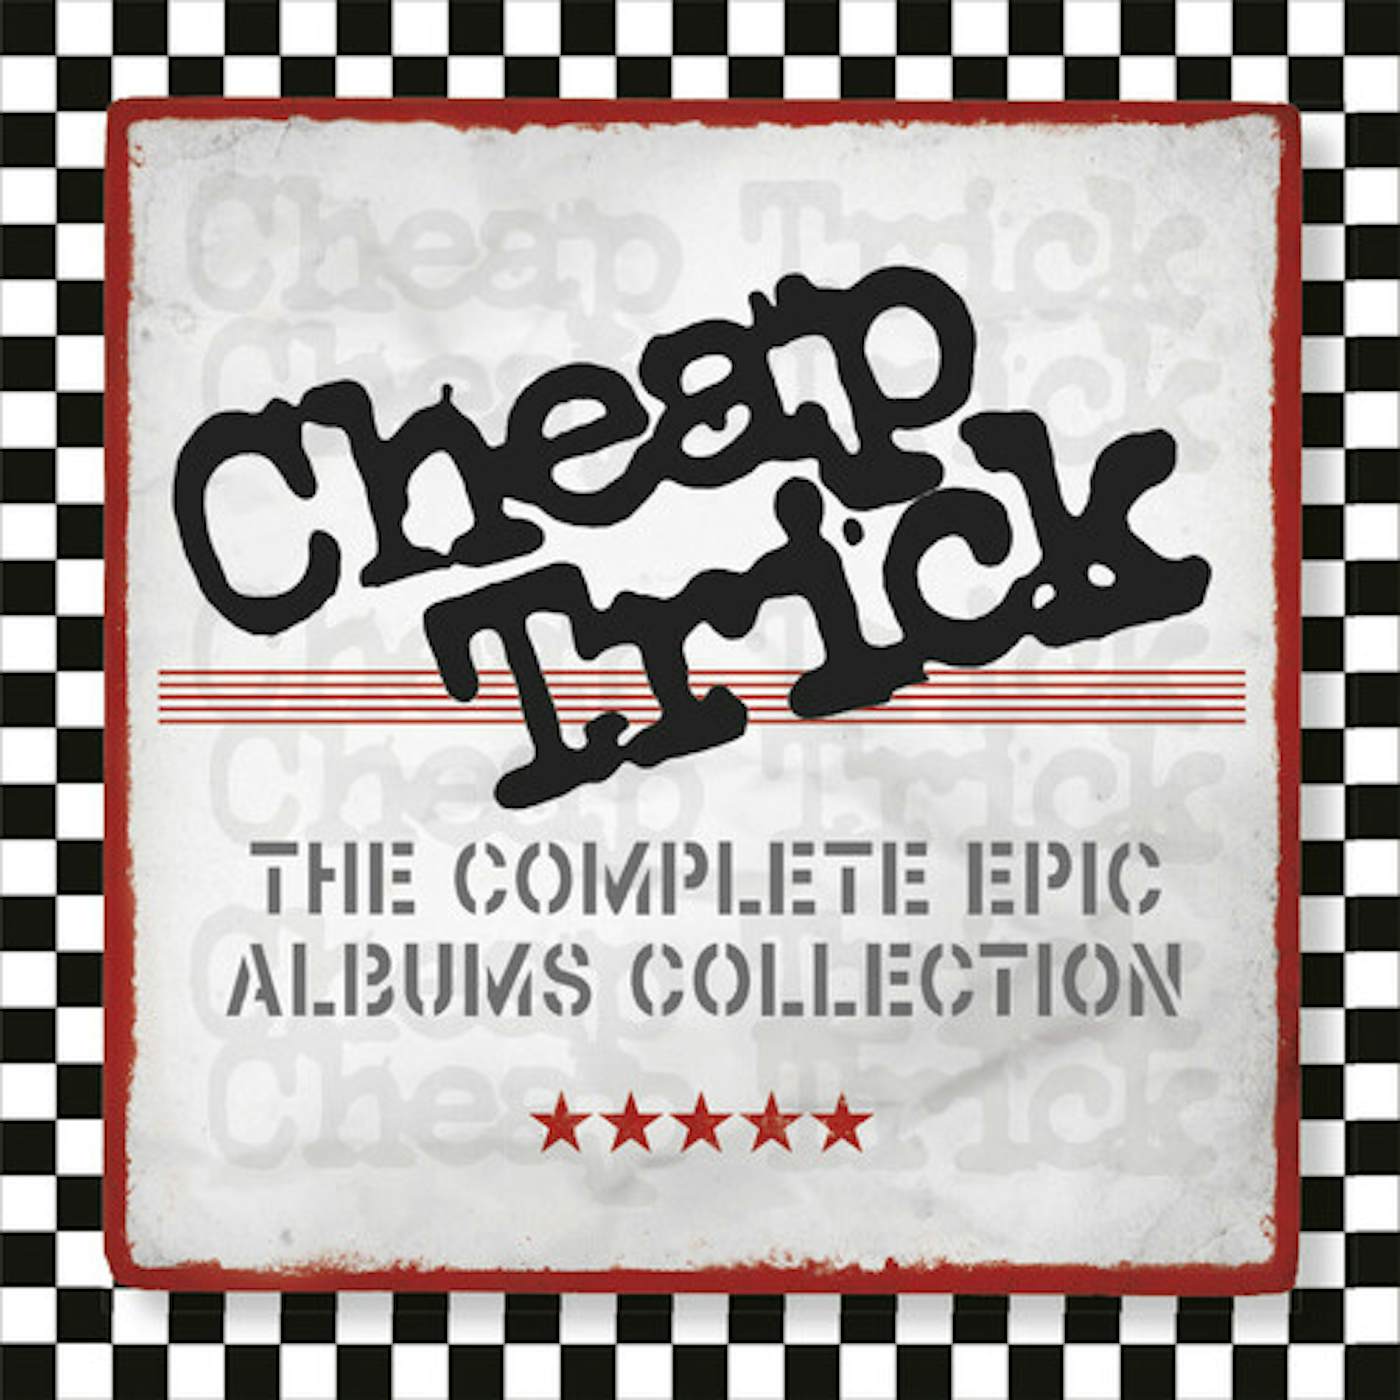 Cheap Trick COMPLETE EPIC ALBUMS COLLECTION CD